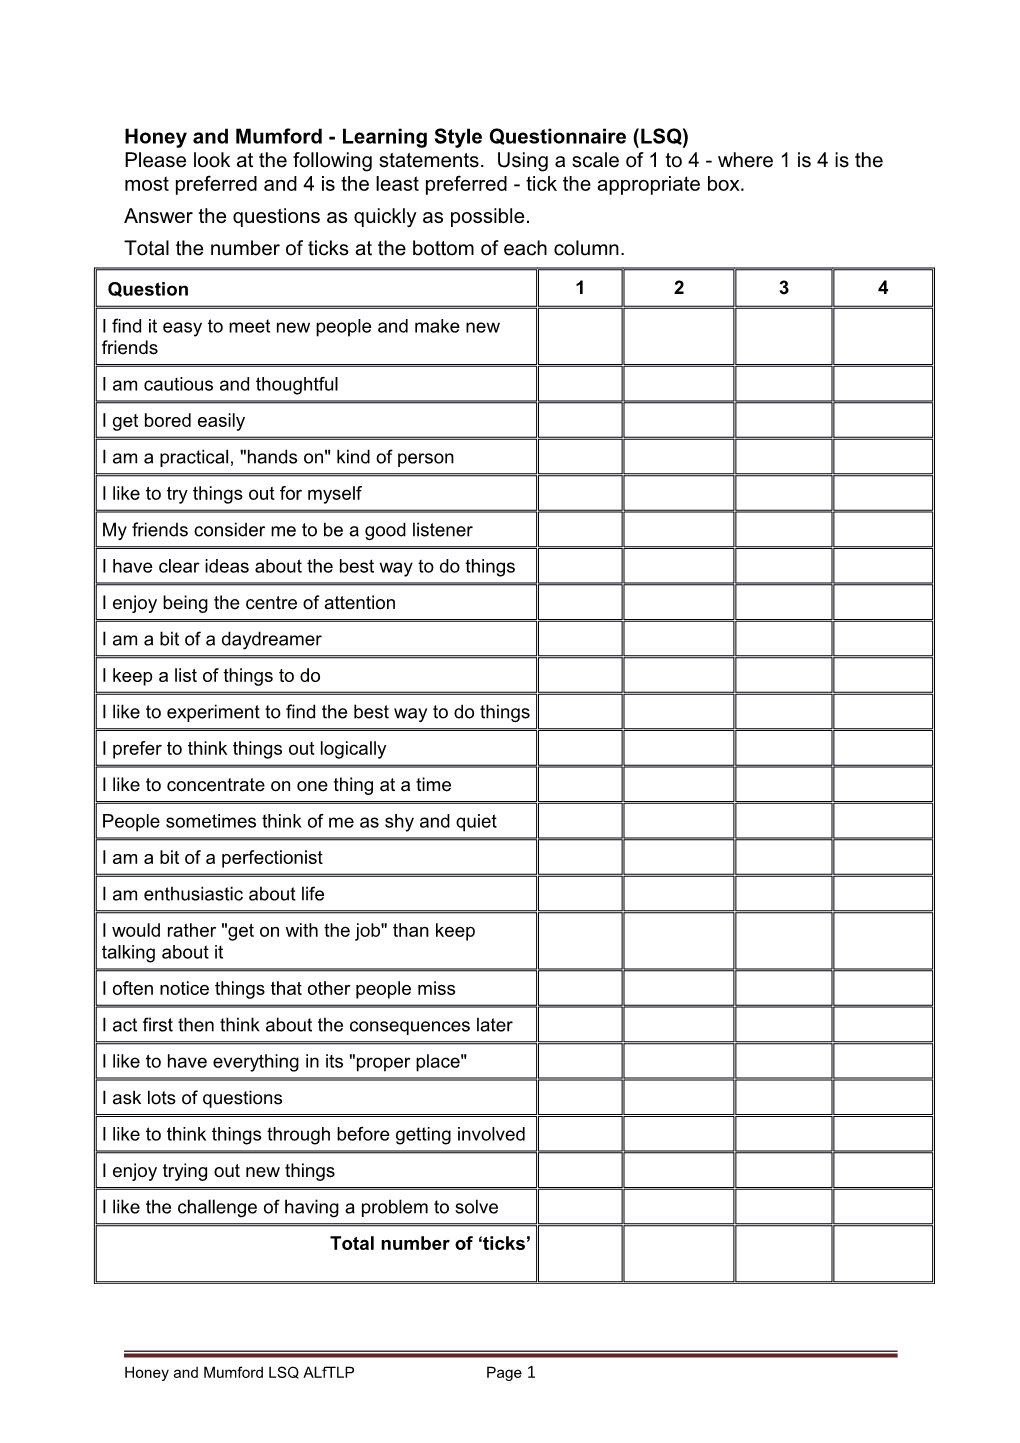 Honey and Mumford - Learning Style Questionnaire(LSQ)